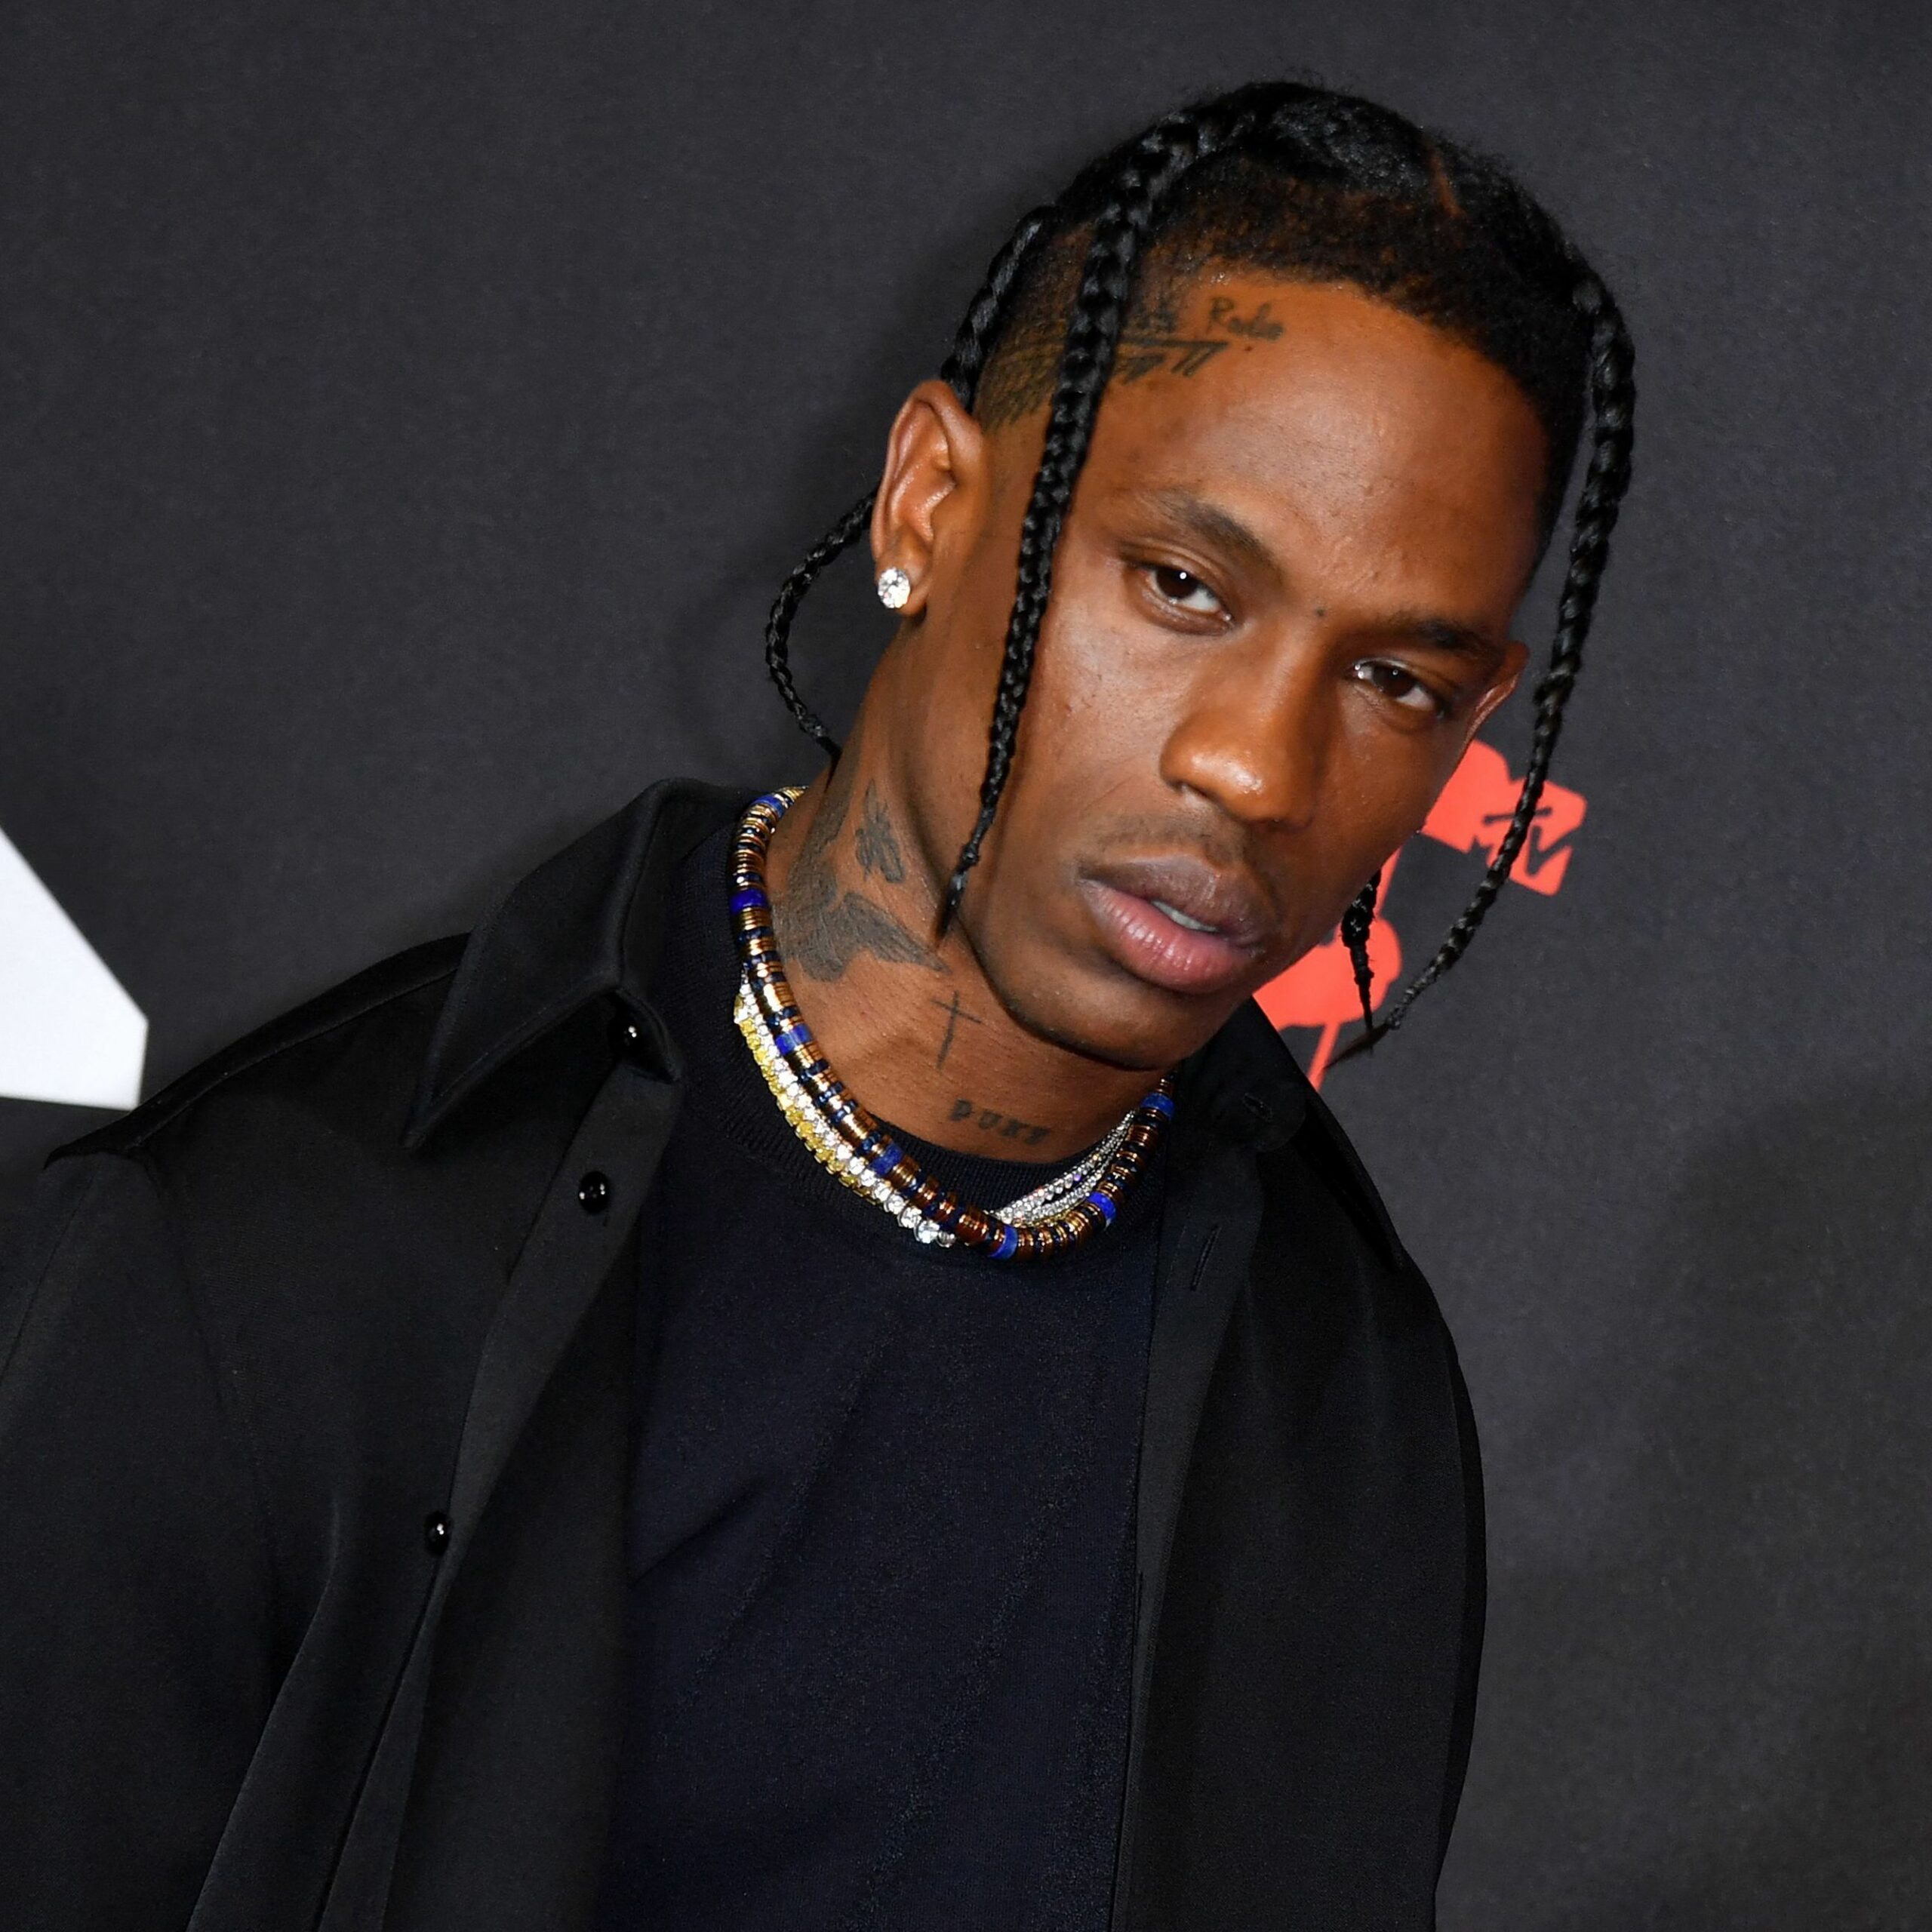 Travis Scott Accused of Punching a Man and Causing $12K of Damage at NYC Nightclub